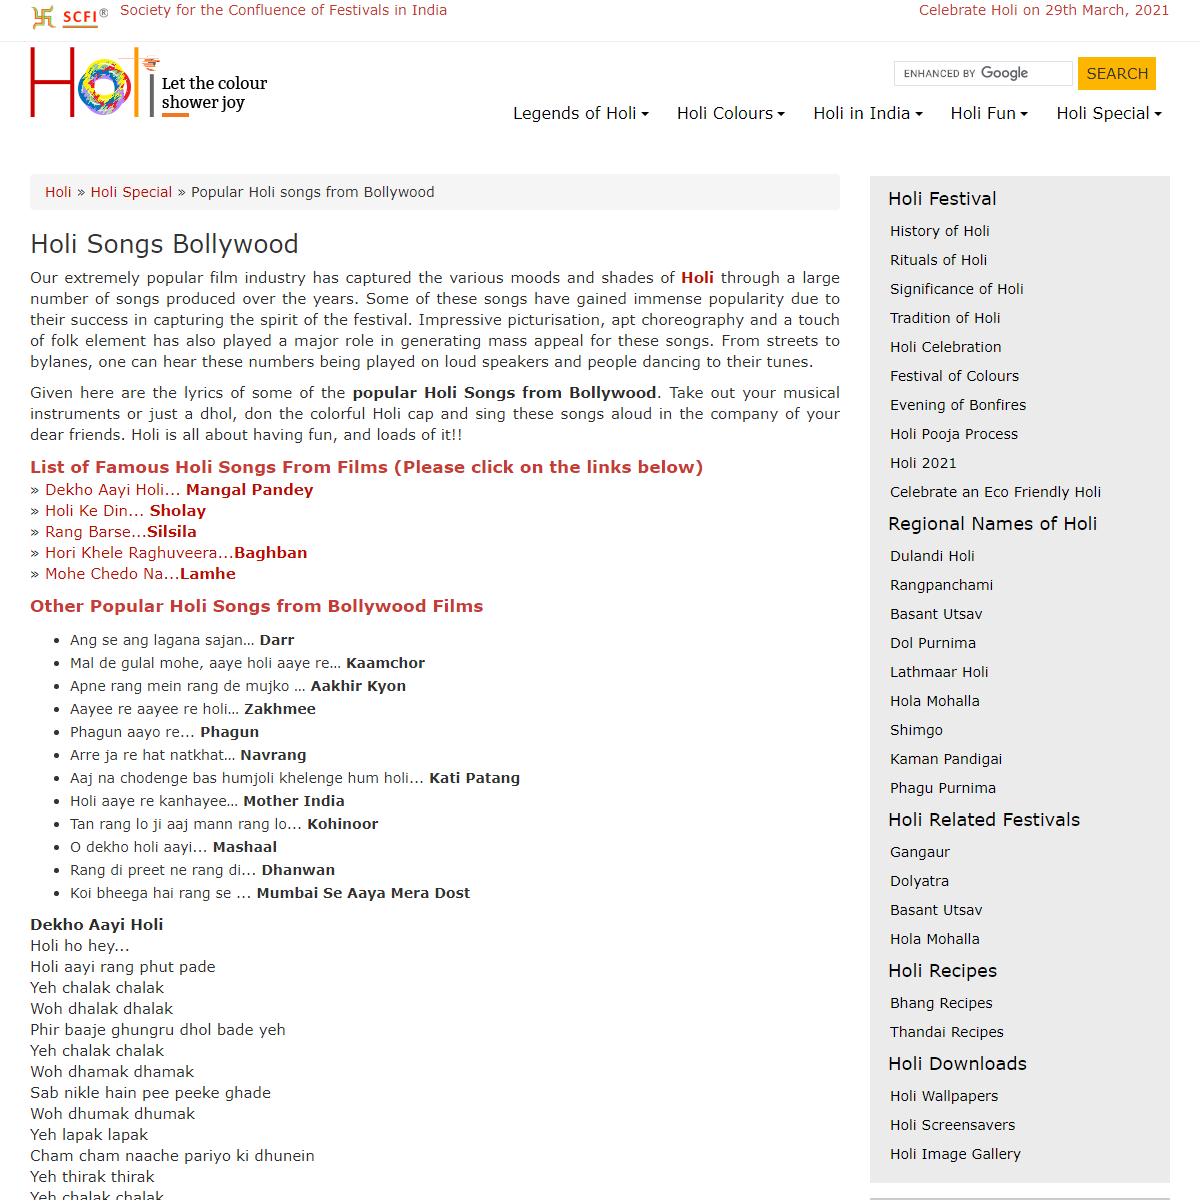 A complete backup of https://www.holifestival.org/holi-songs-bollywood.html